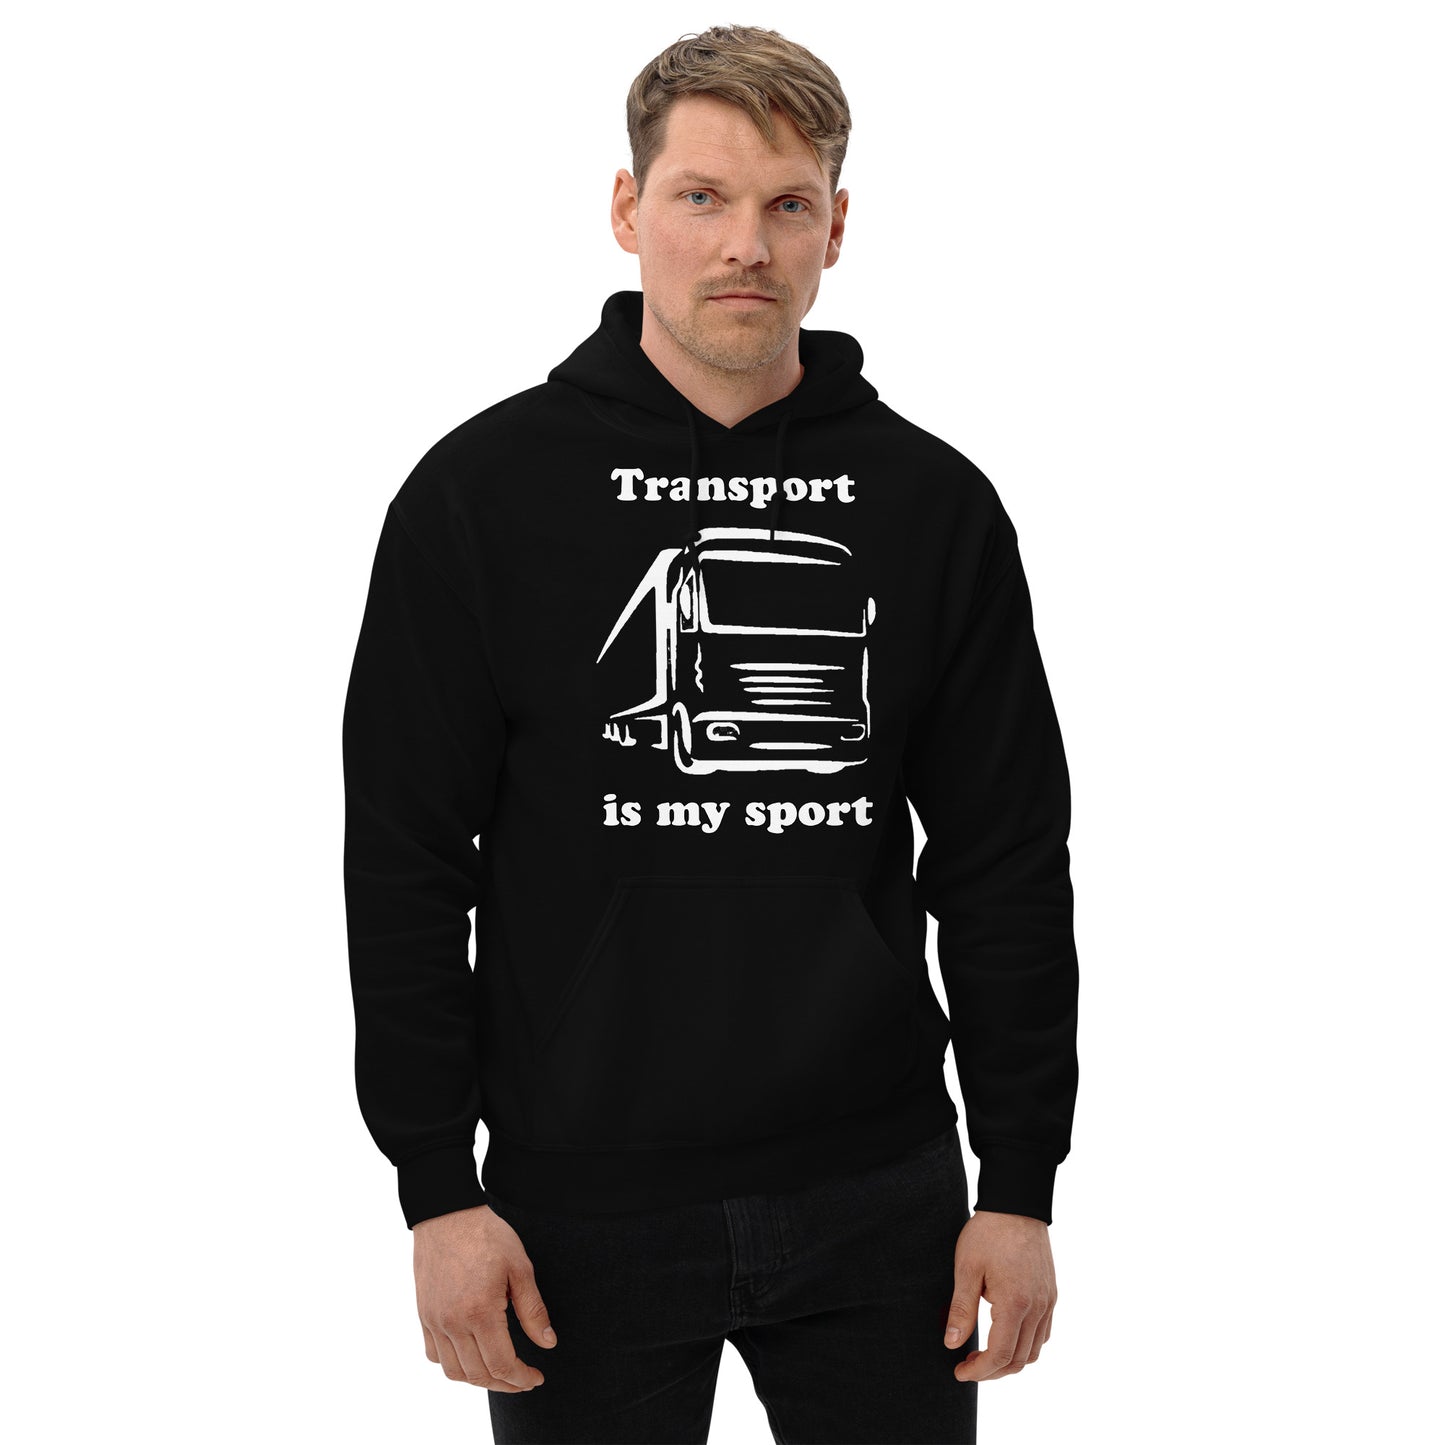 Man with black hoodie with picture of truck and text "Transport is my sport"